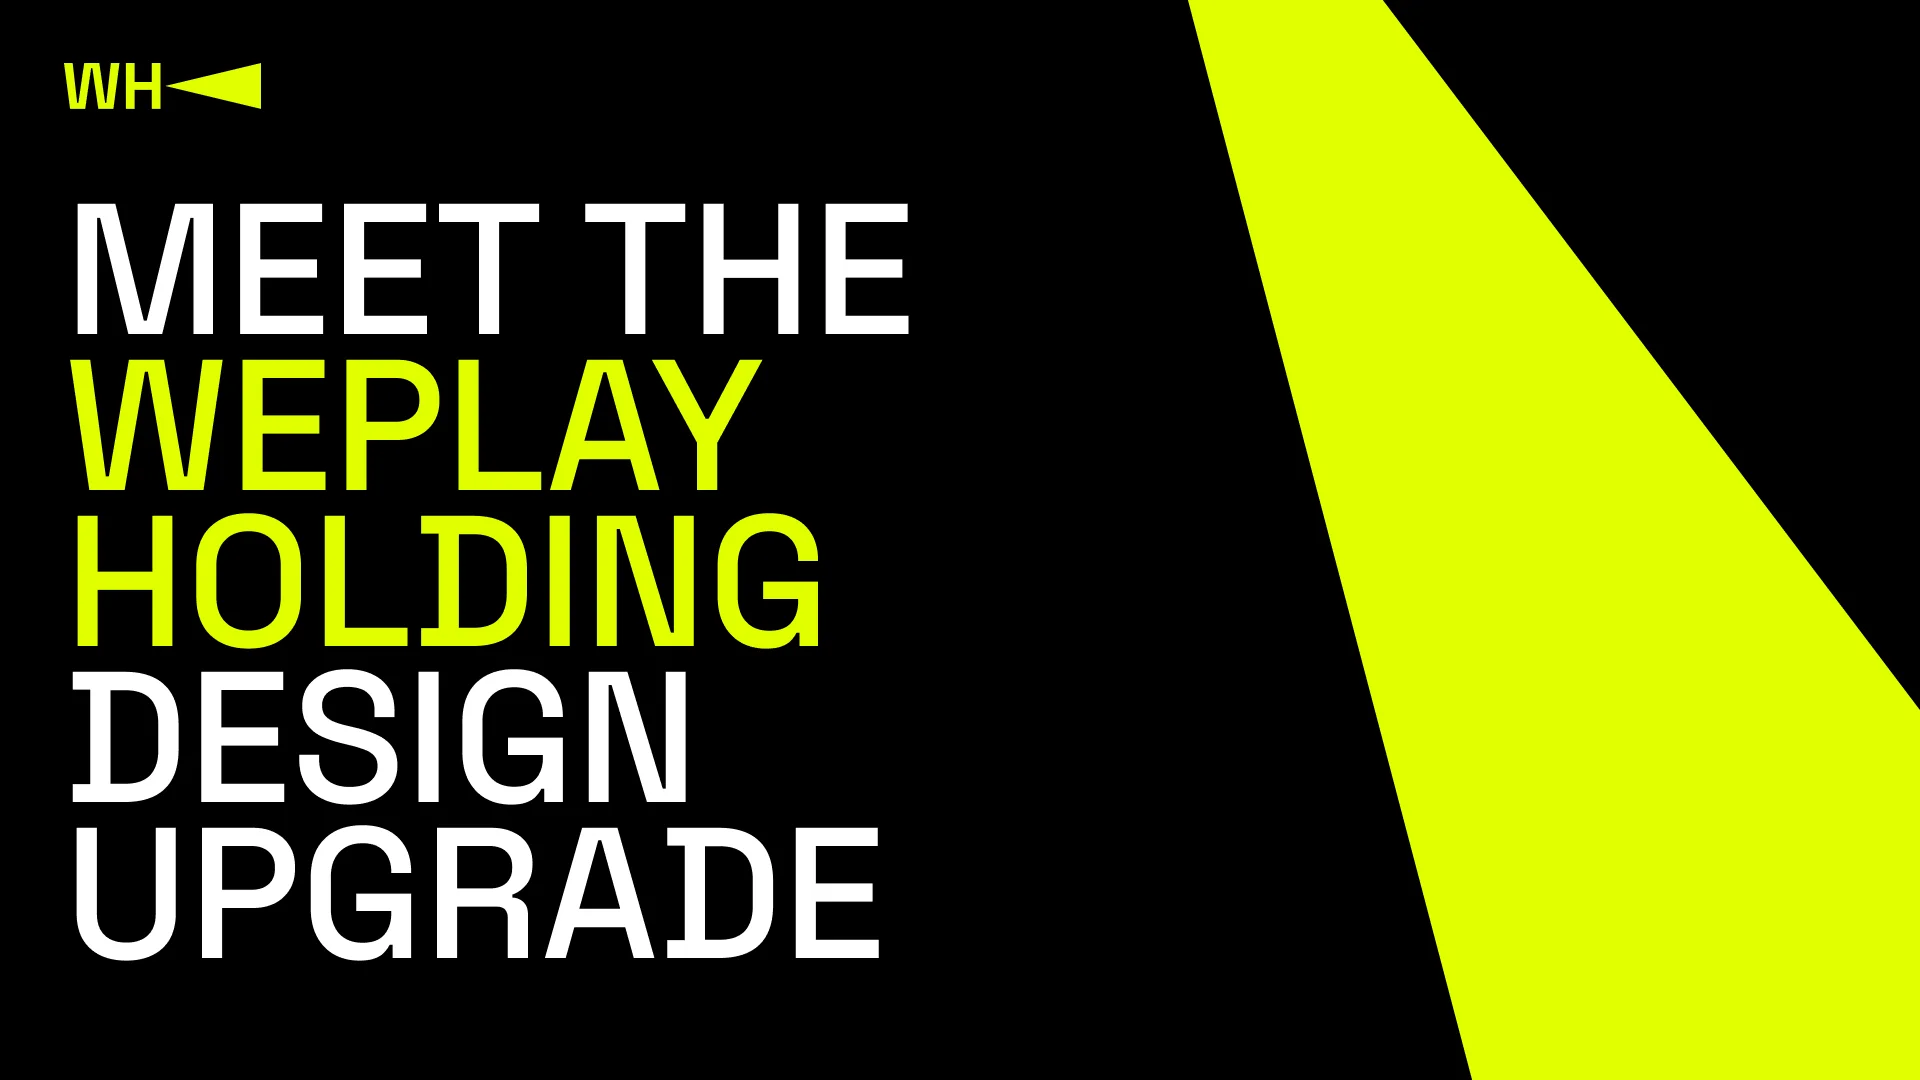 Meet the WePlay Holding design upgrade